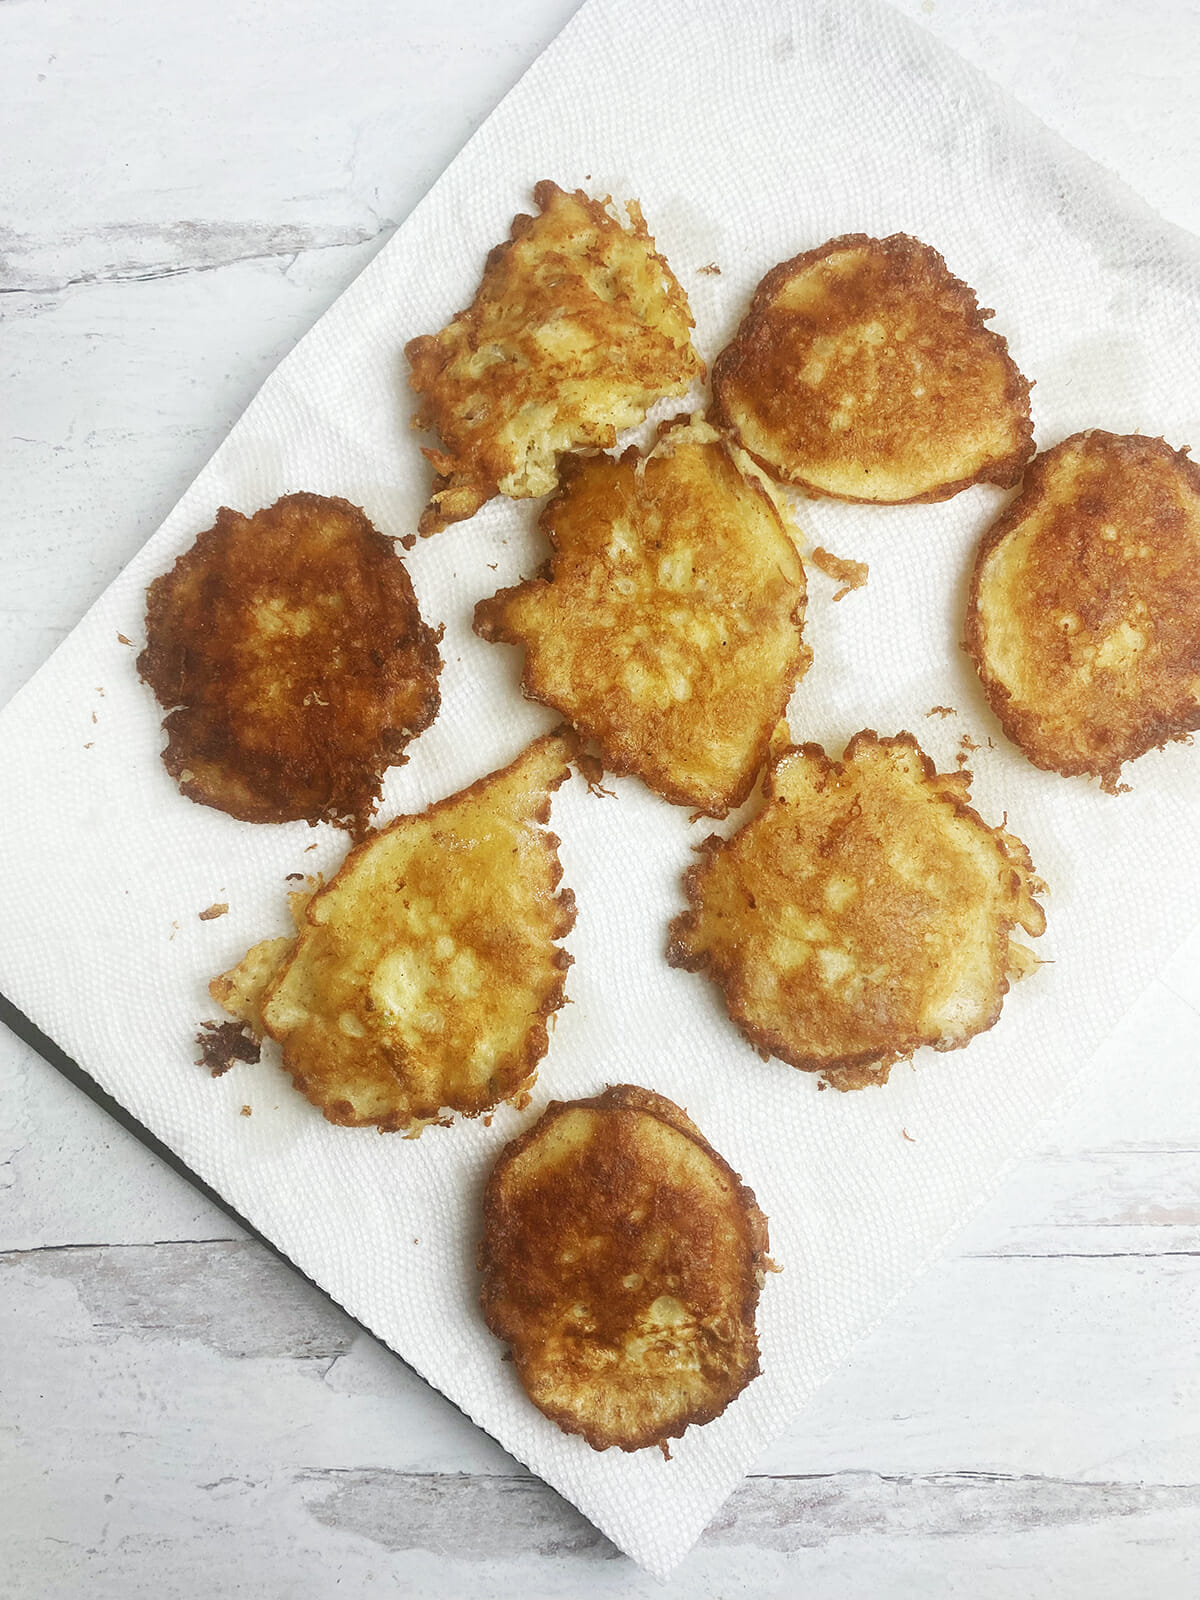 clam fritters draining on paper towels